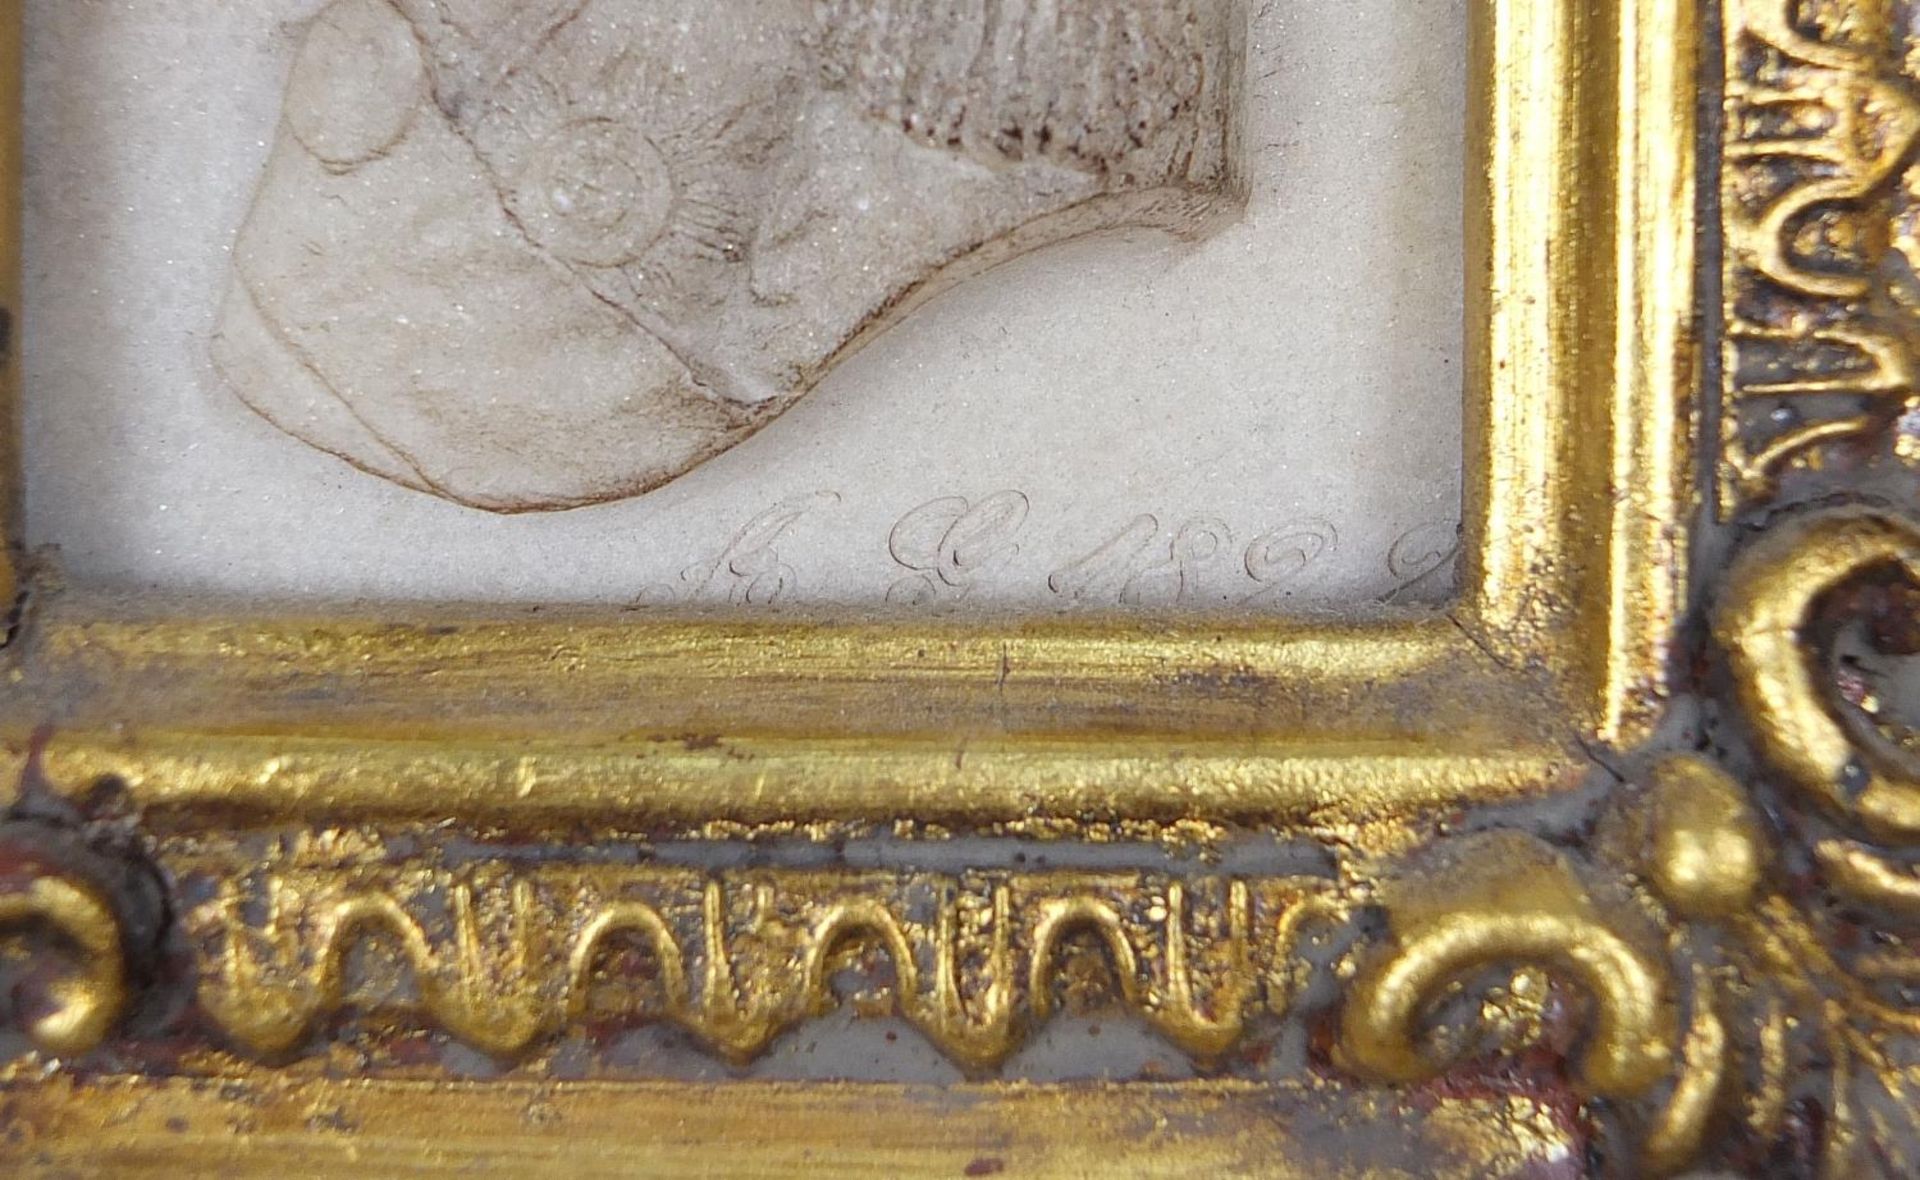 Naval interest marble style plaque of Lord Nelson housed in an ornate gilt frame, 20cm x 18cm - Image 5 of 8